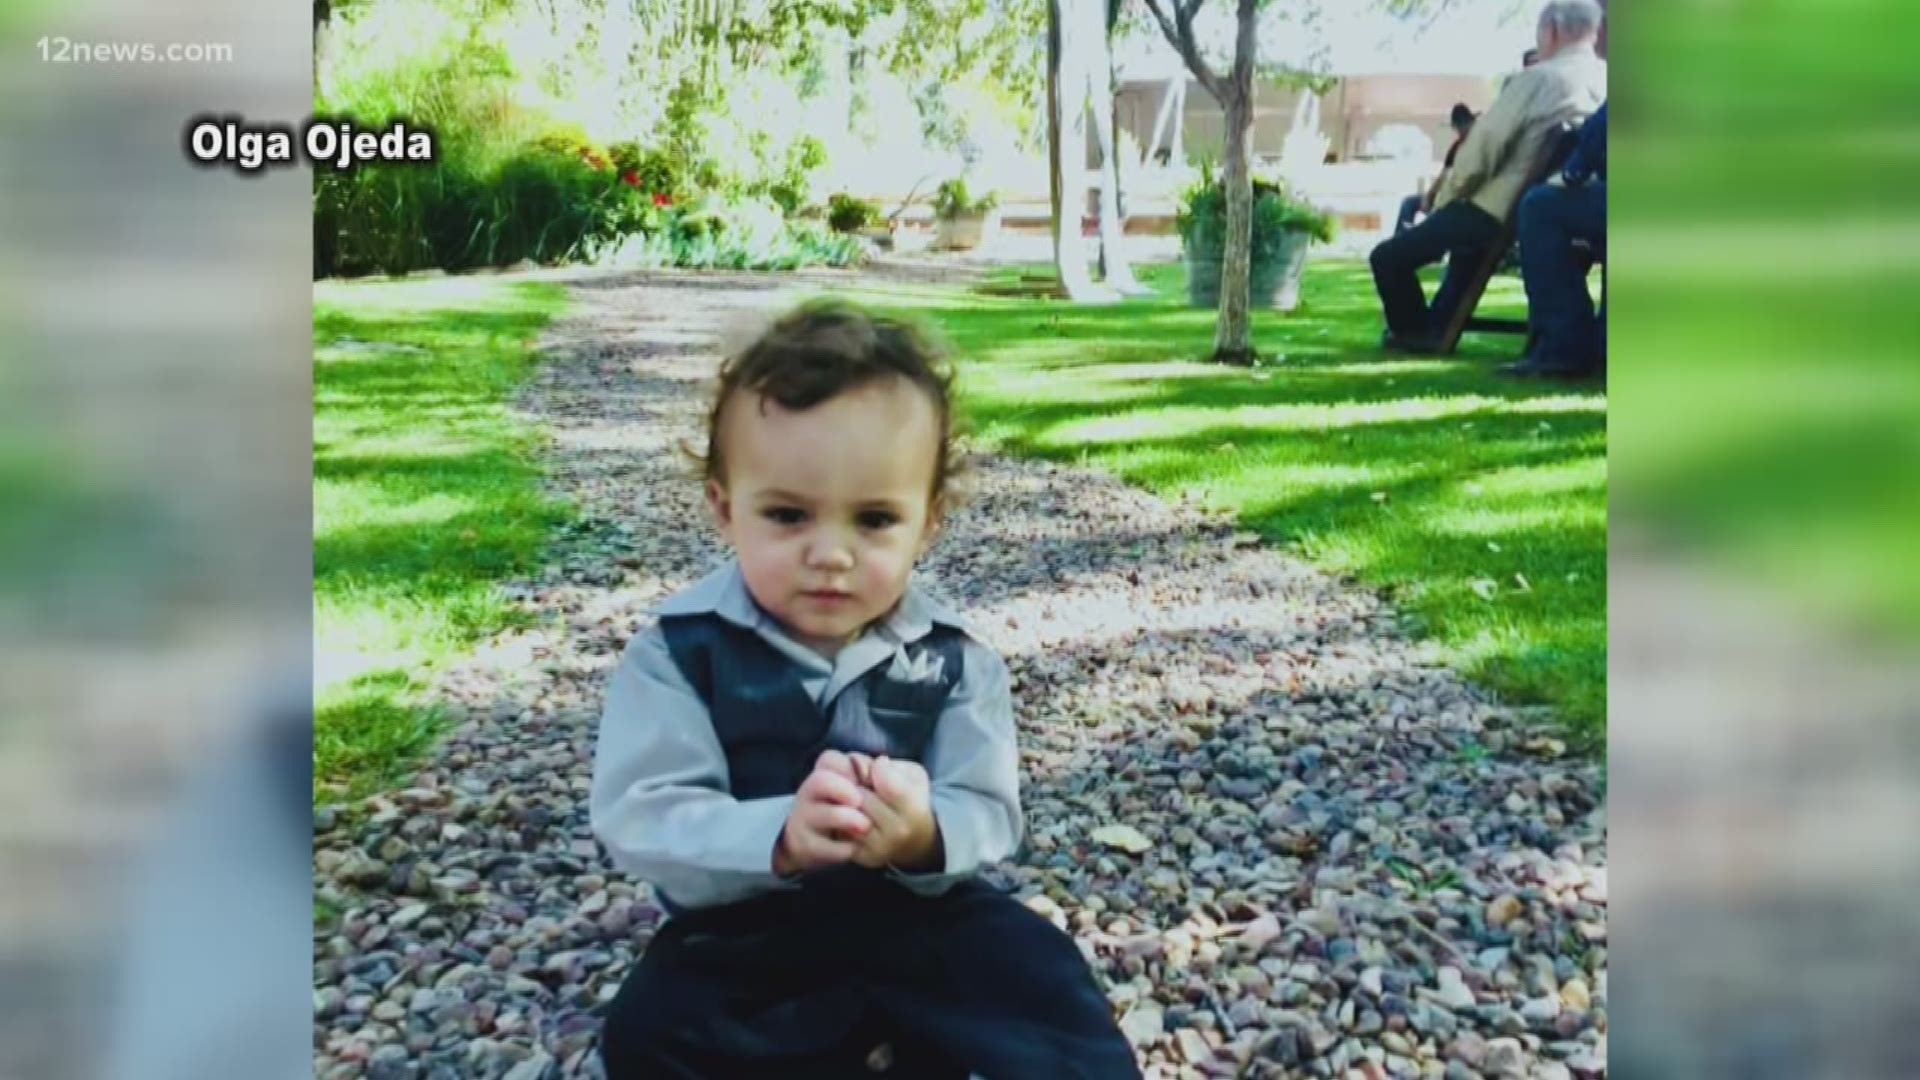 Giovanni Elias Ojeda was at a Halloween party when he ended up in a pool. The one-year-old was breathing when he was pulled out of the pool, but later passed away.